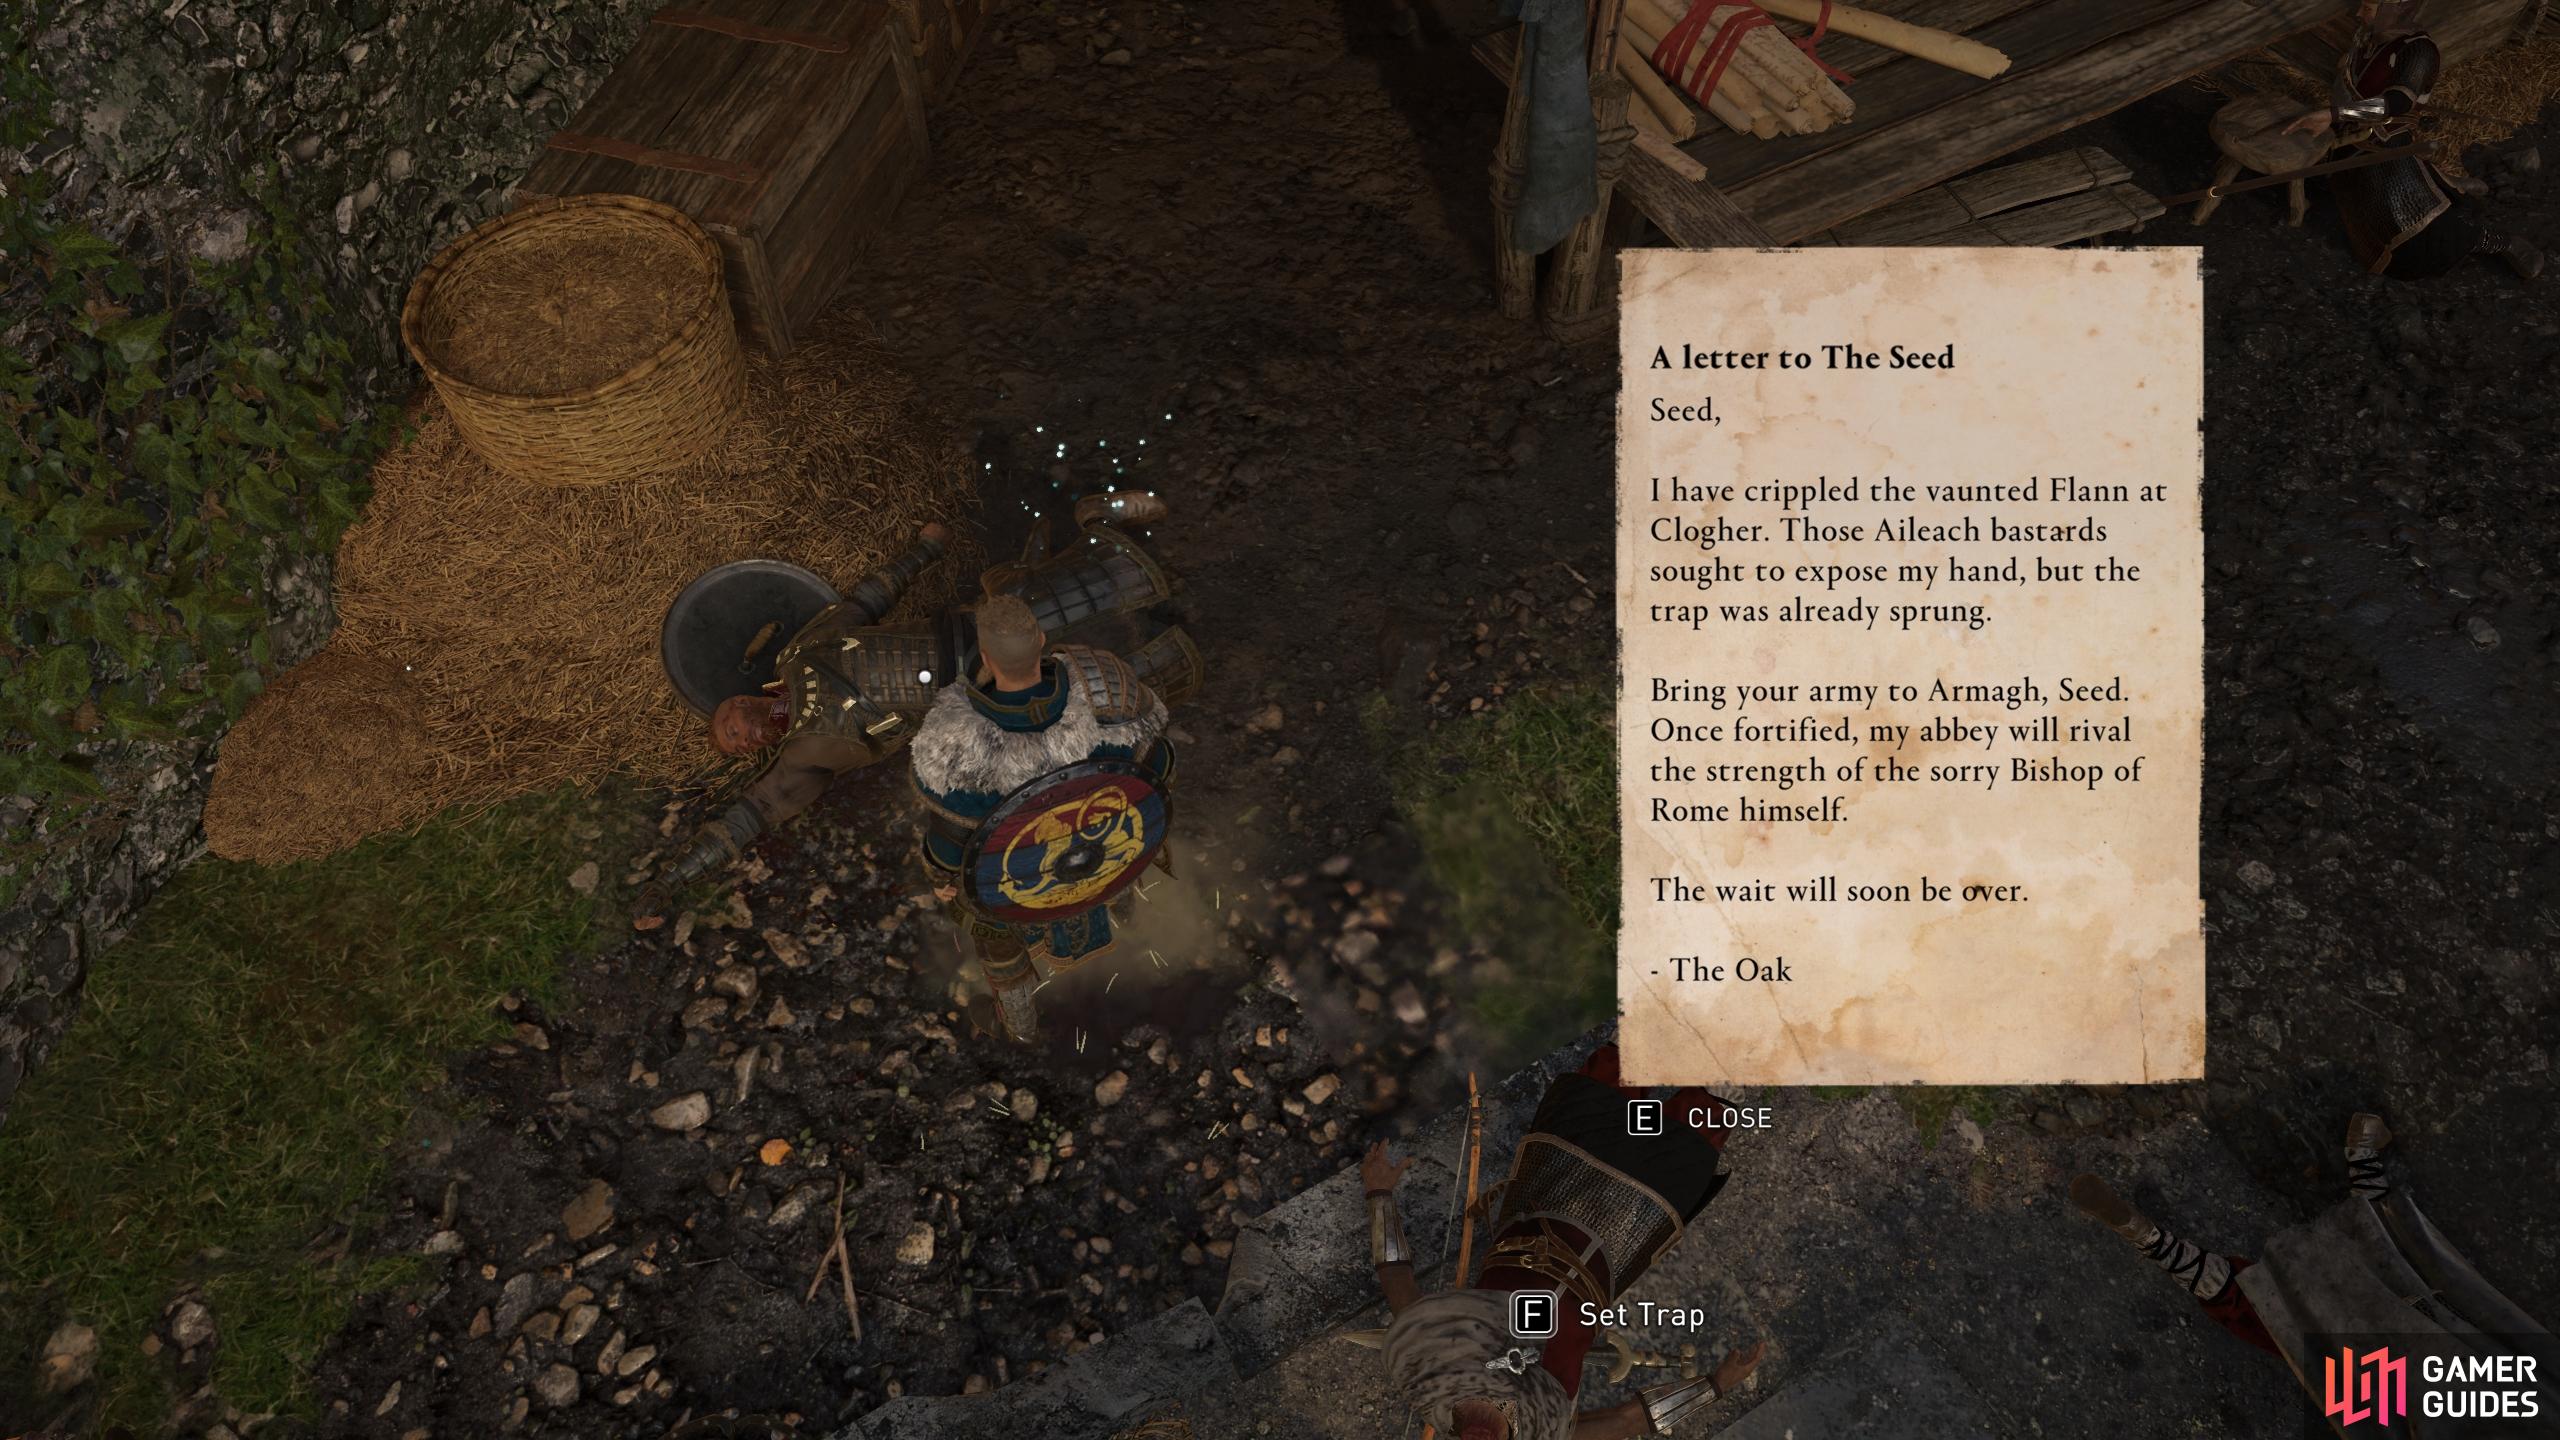 You can read a note from The Seed, confirming Abbot Eogan as the leader of the Druidic cult.